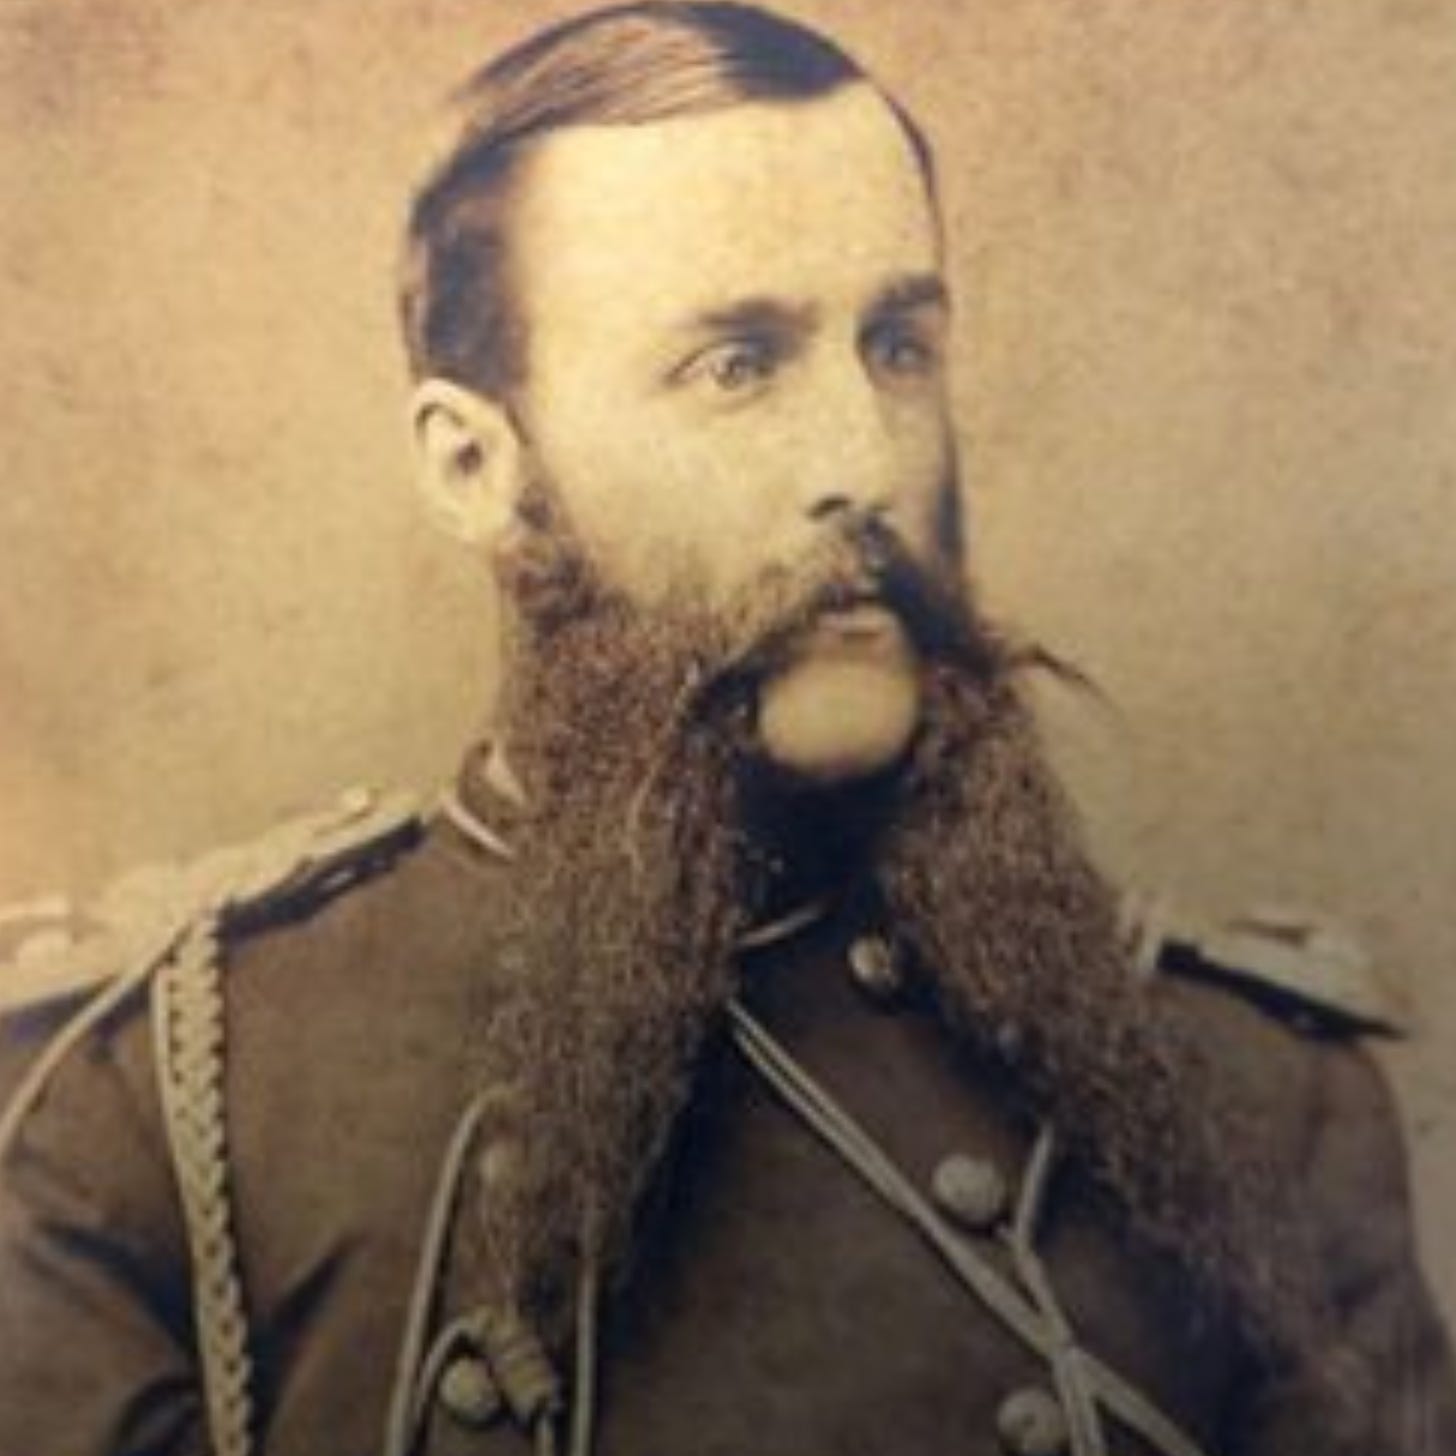 photo of Lt. William Cooke and his massive sideburns